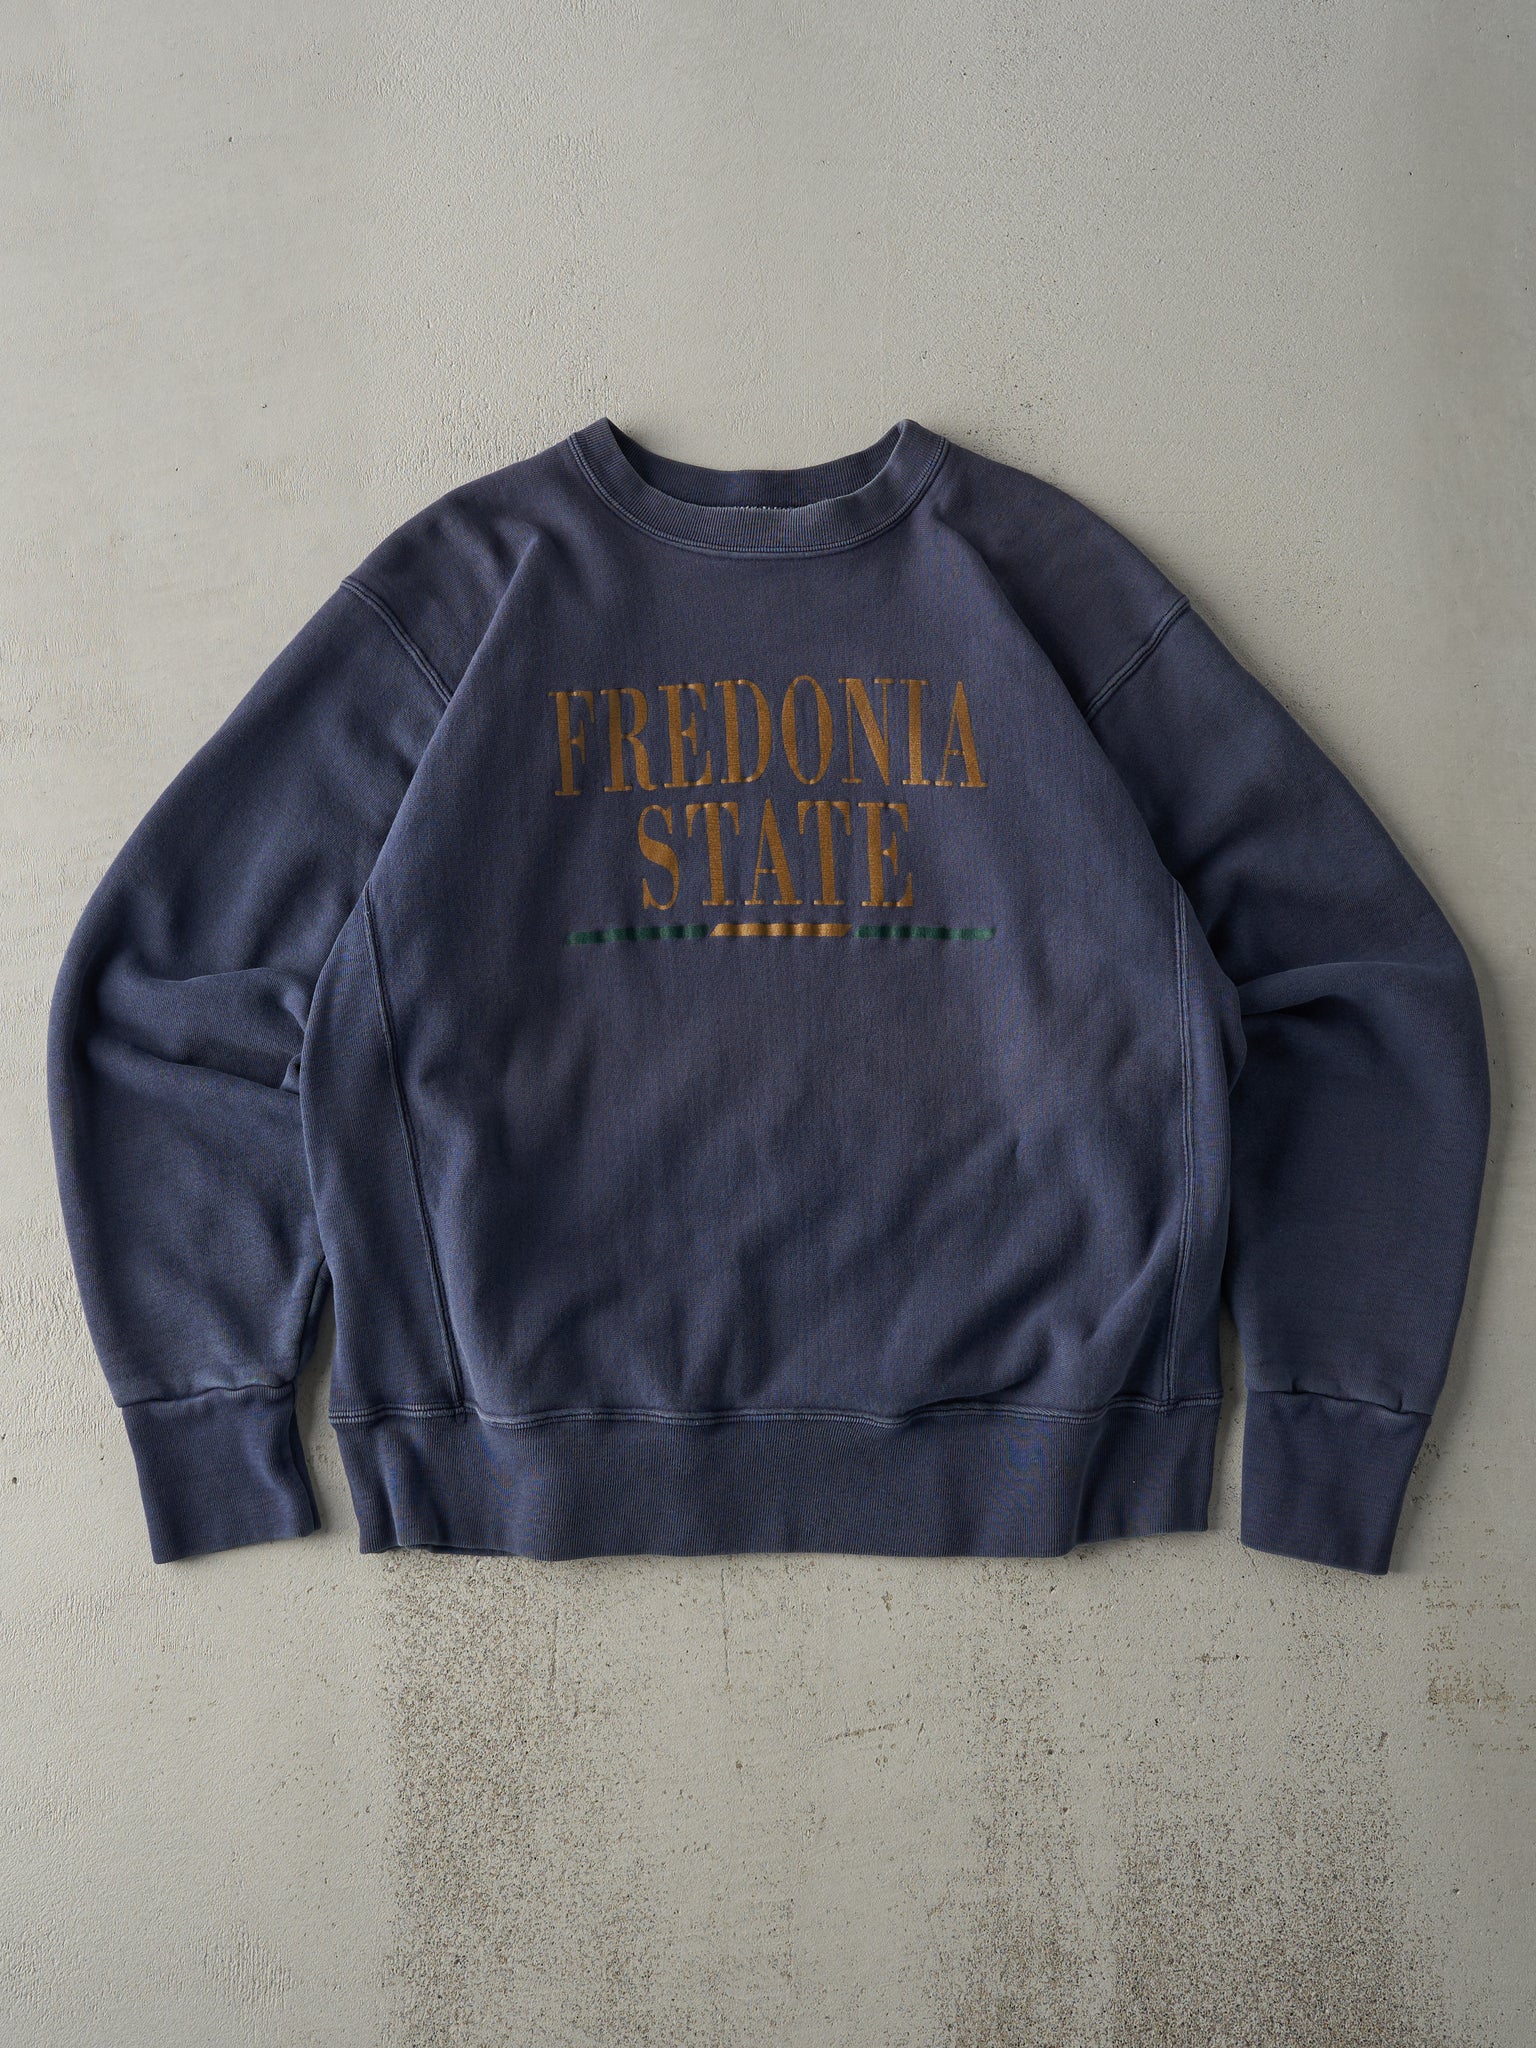 Vintage 90s Faded Navy Blue Fredonia State Crewneck (L)